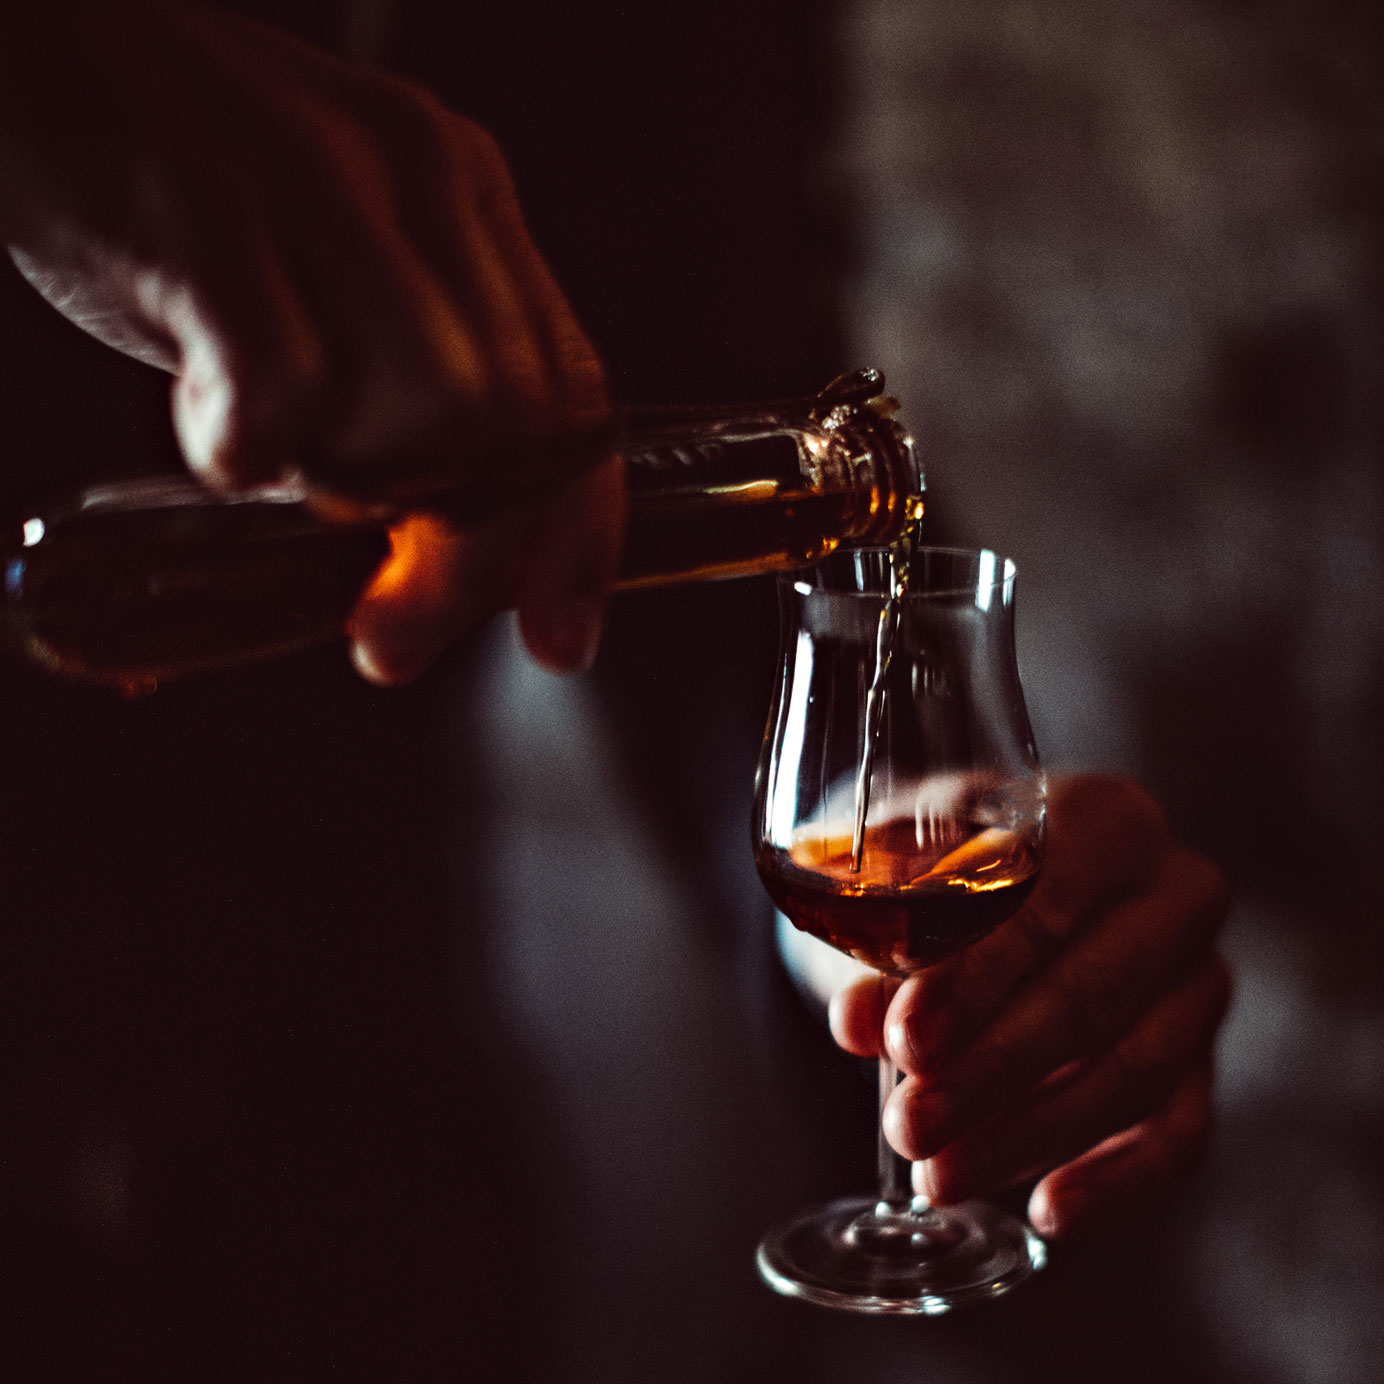 How to Drink Cognac, According to a French Bartender | VinePair